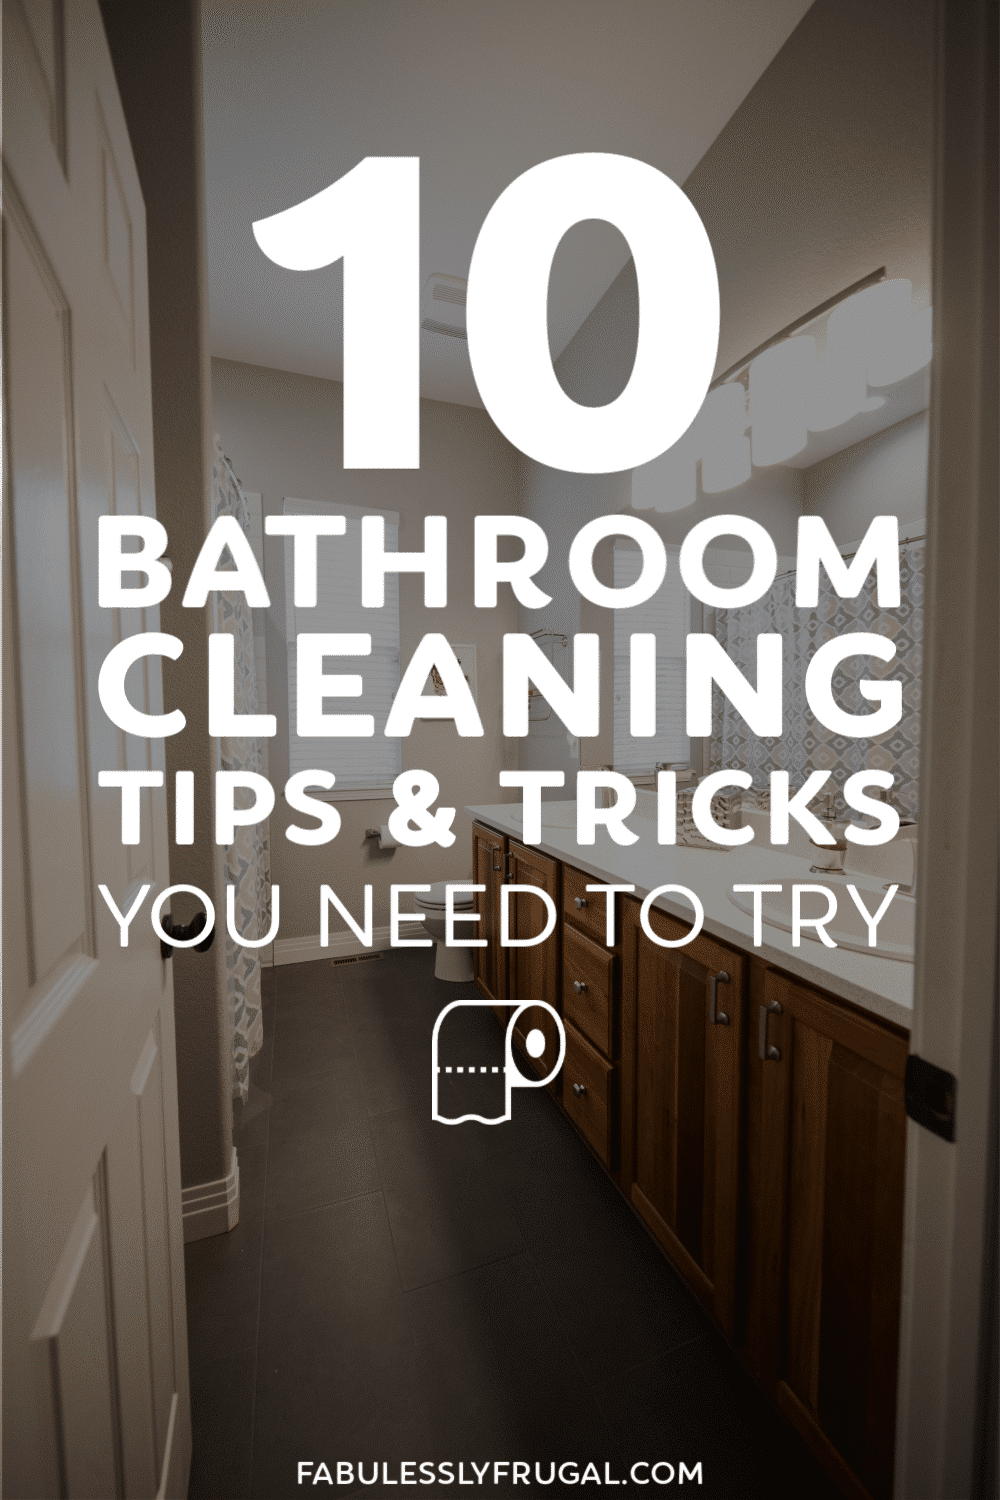 Bathroom cleaning tips and tricks